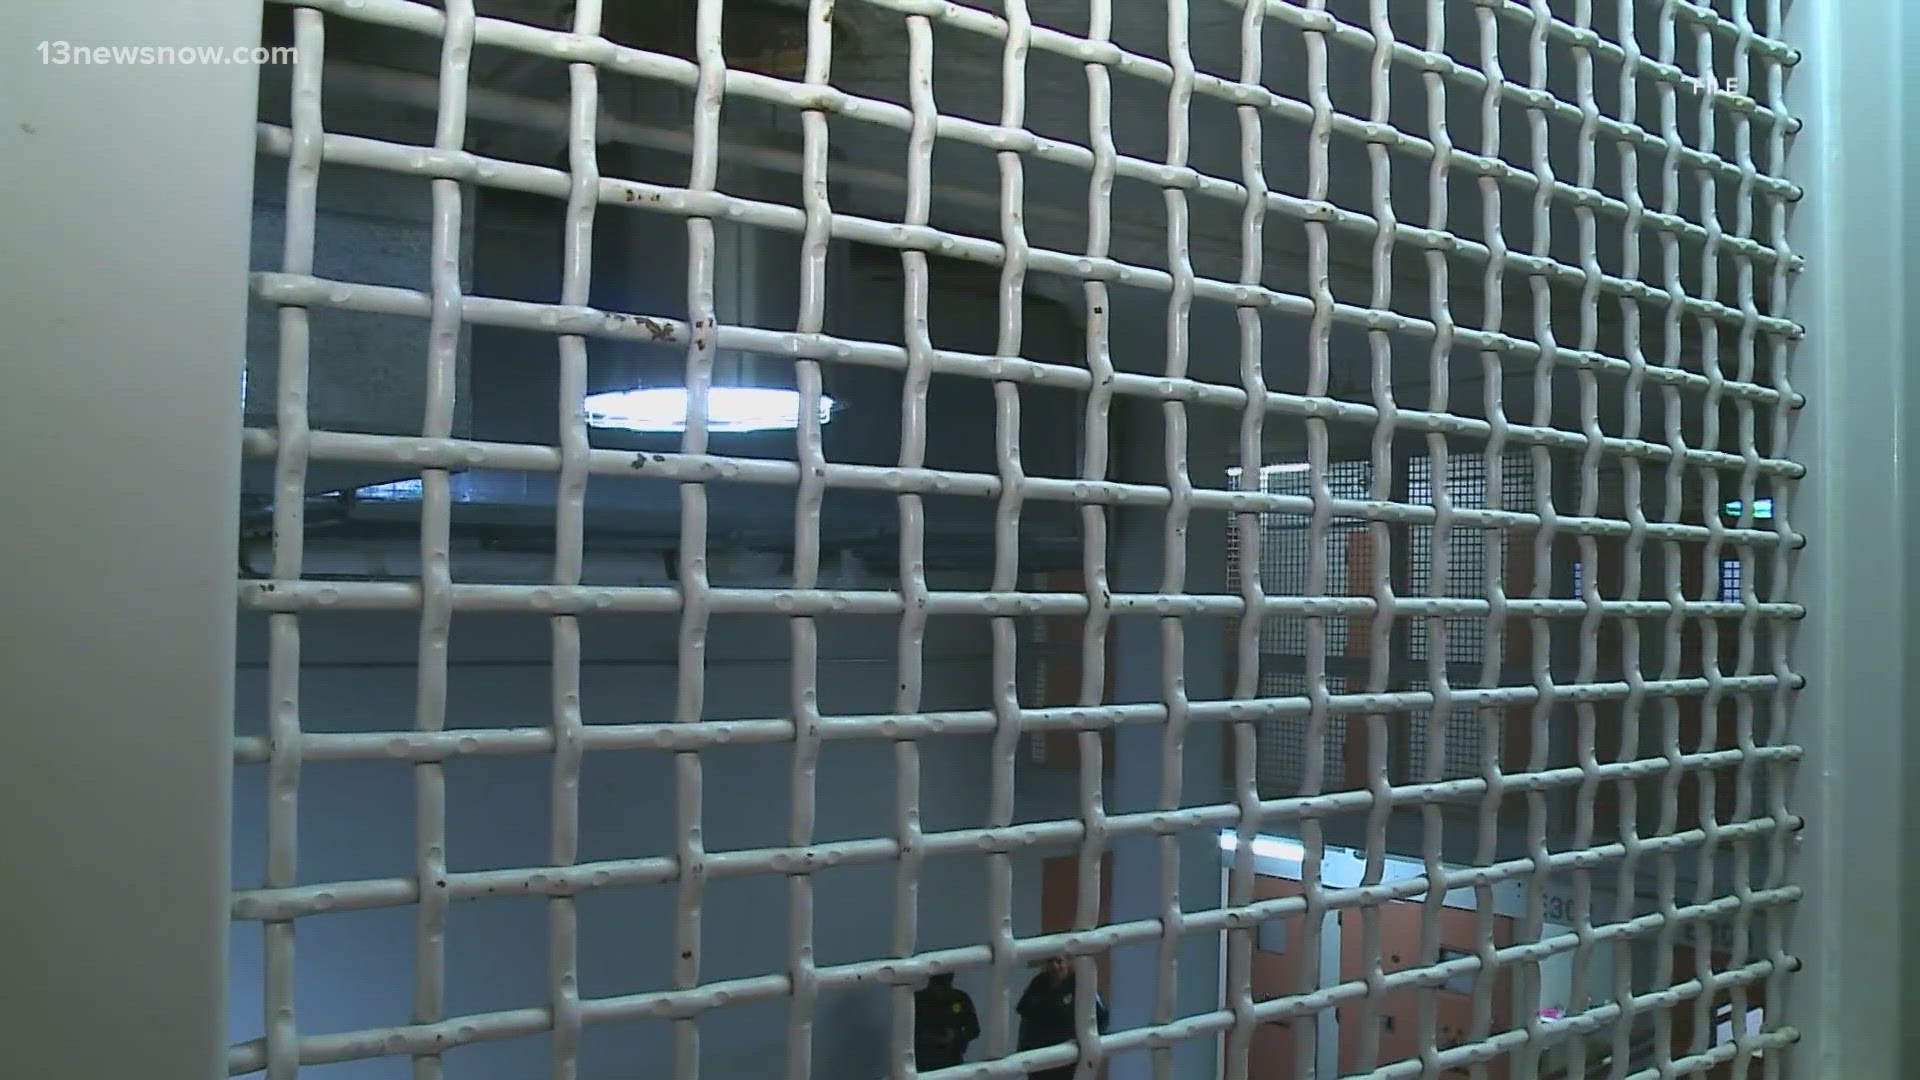 Portsmouth sheriff's deputies are struggling with limited space for underage inmates.